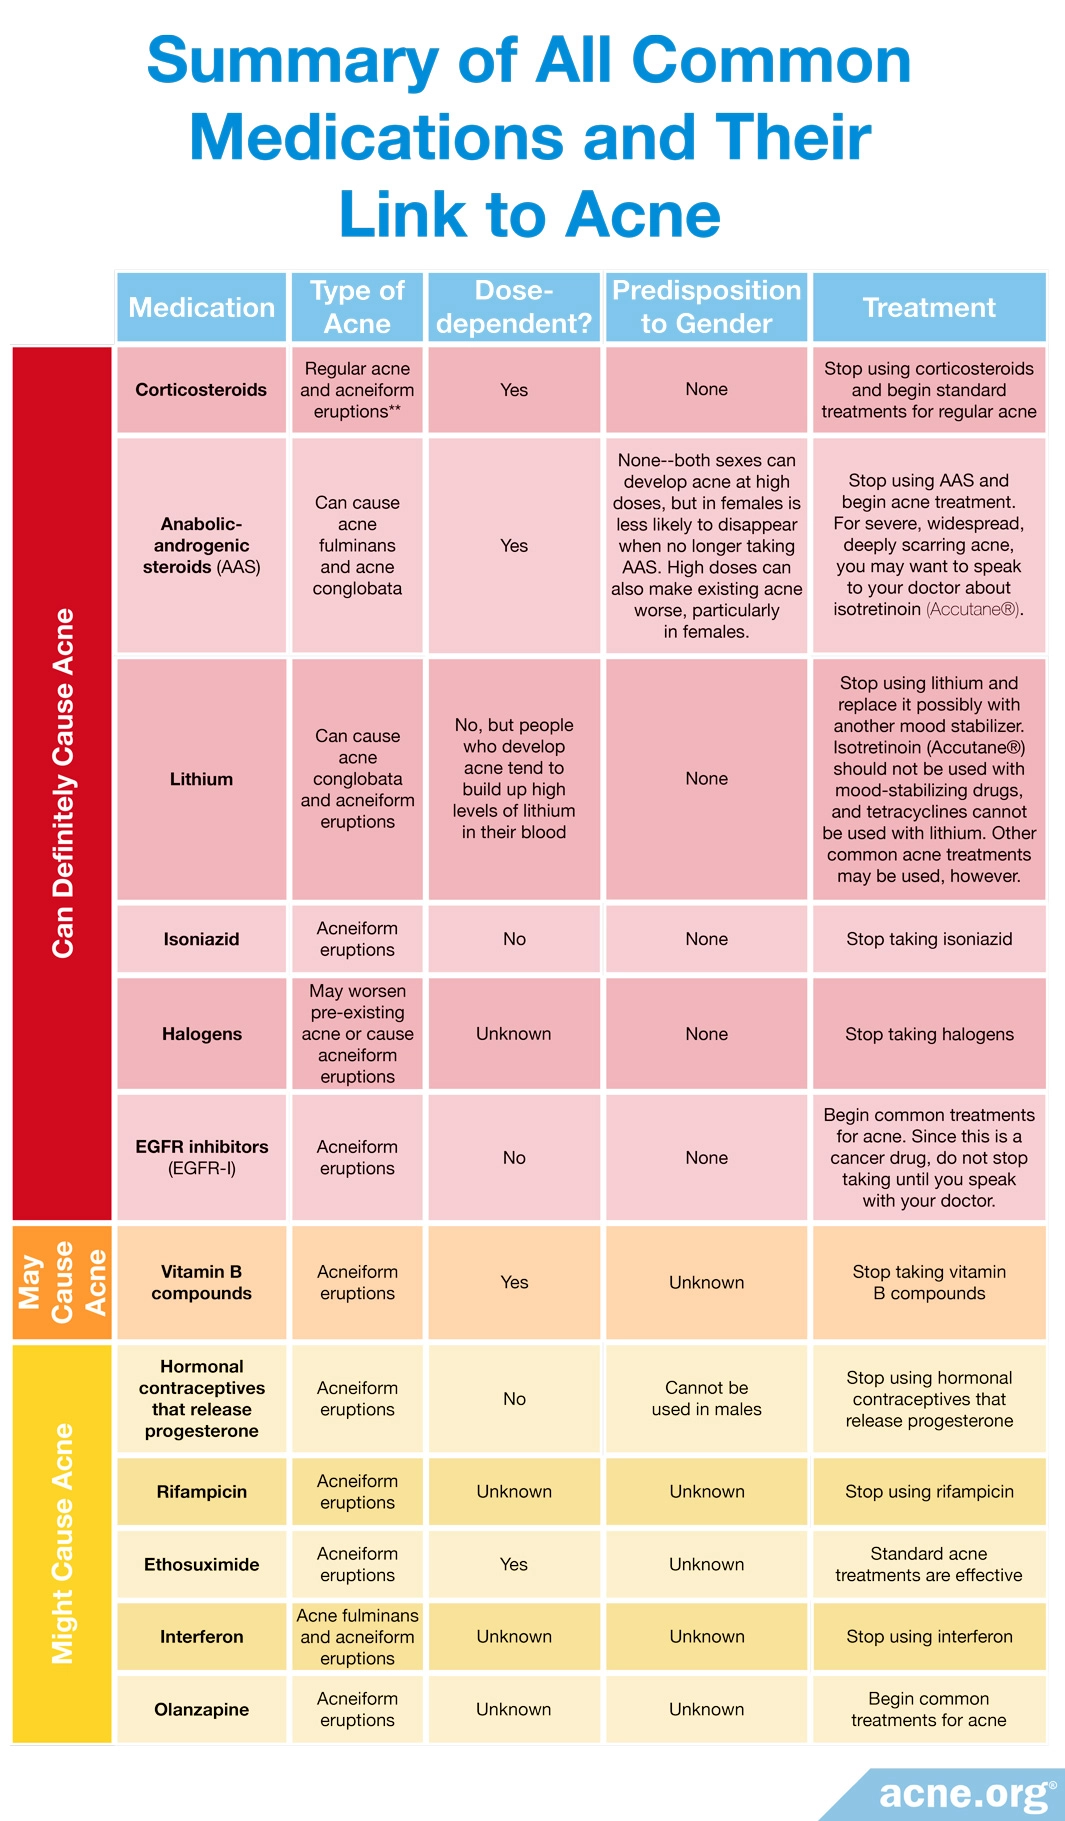 Summary of All Common Medications and Their Link to Acne